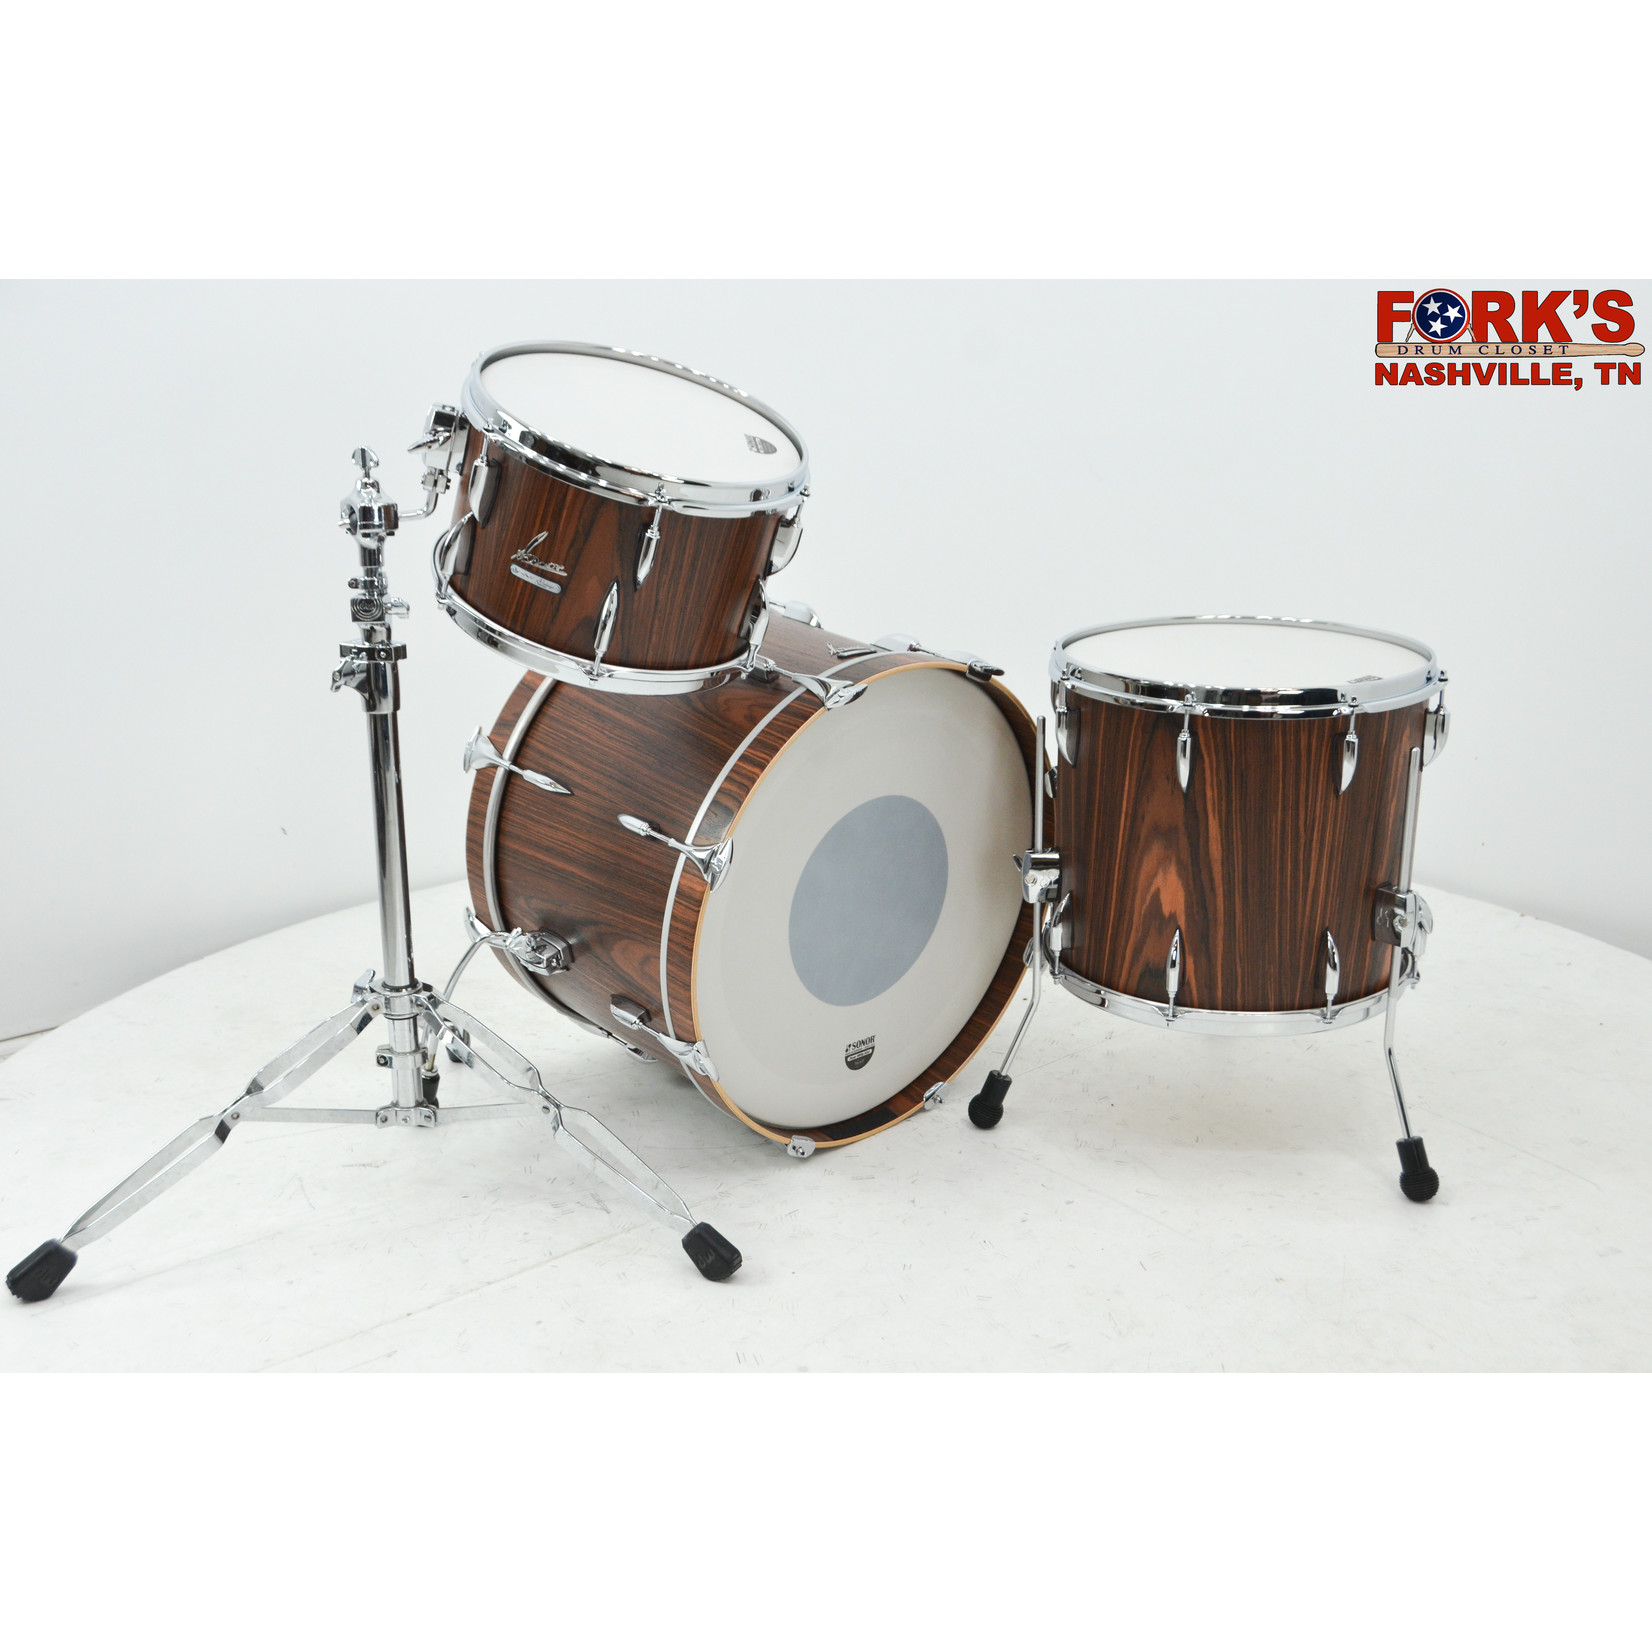 Sonor Sonor Vintage Series 3pc Drum Kit - "Rosewood Semi Gloss"